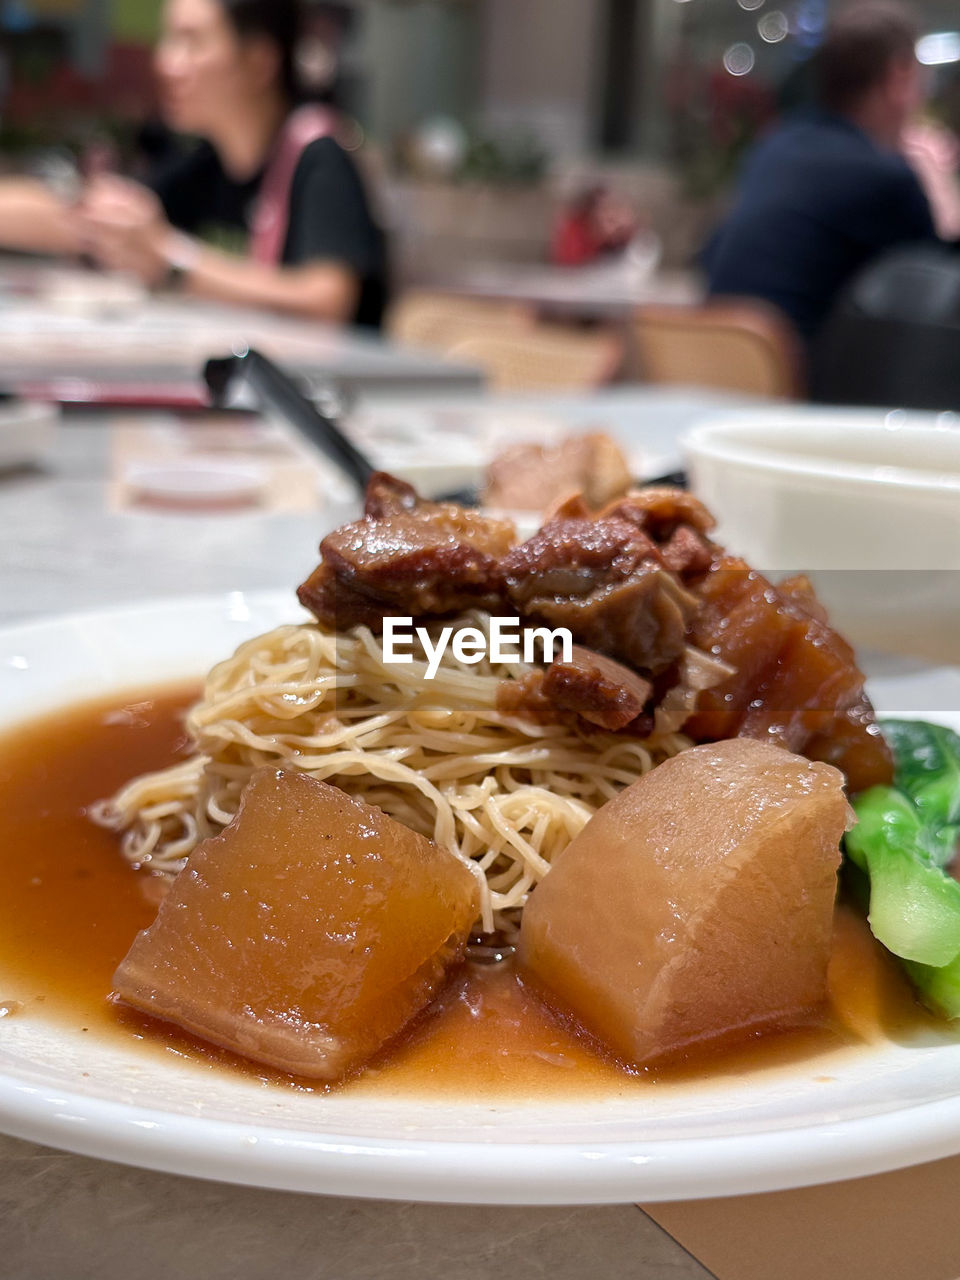 food and drink, food, dish, meal, cuisine, lunch, plate, restaurant, business, meat, focus on foreground, healthy eating, chinese food, table, asian food, indoors, pasta, dinner, freshness, breakfast, italian food, close-up, city